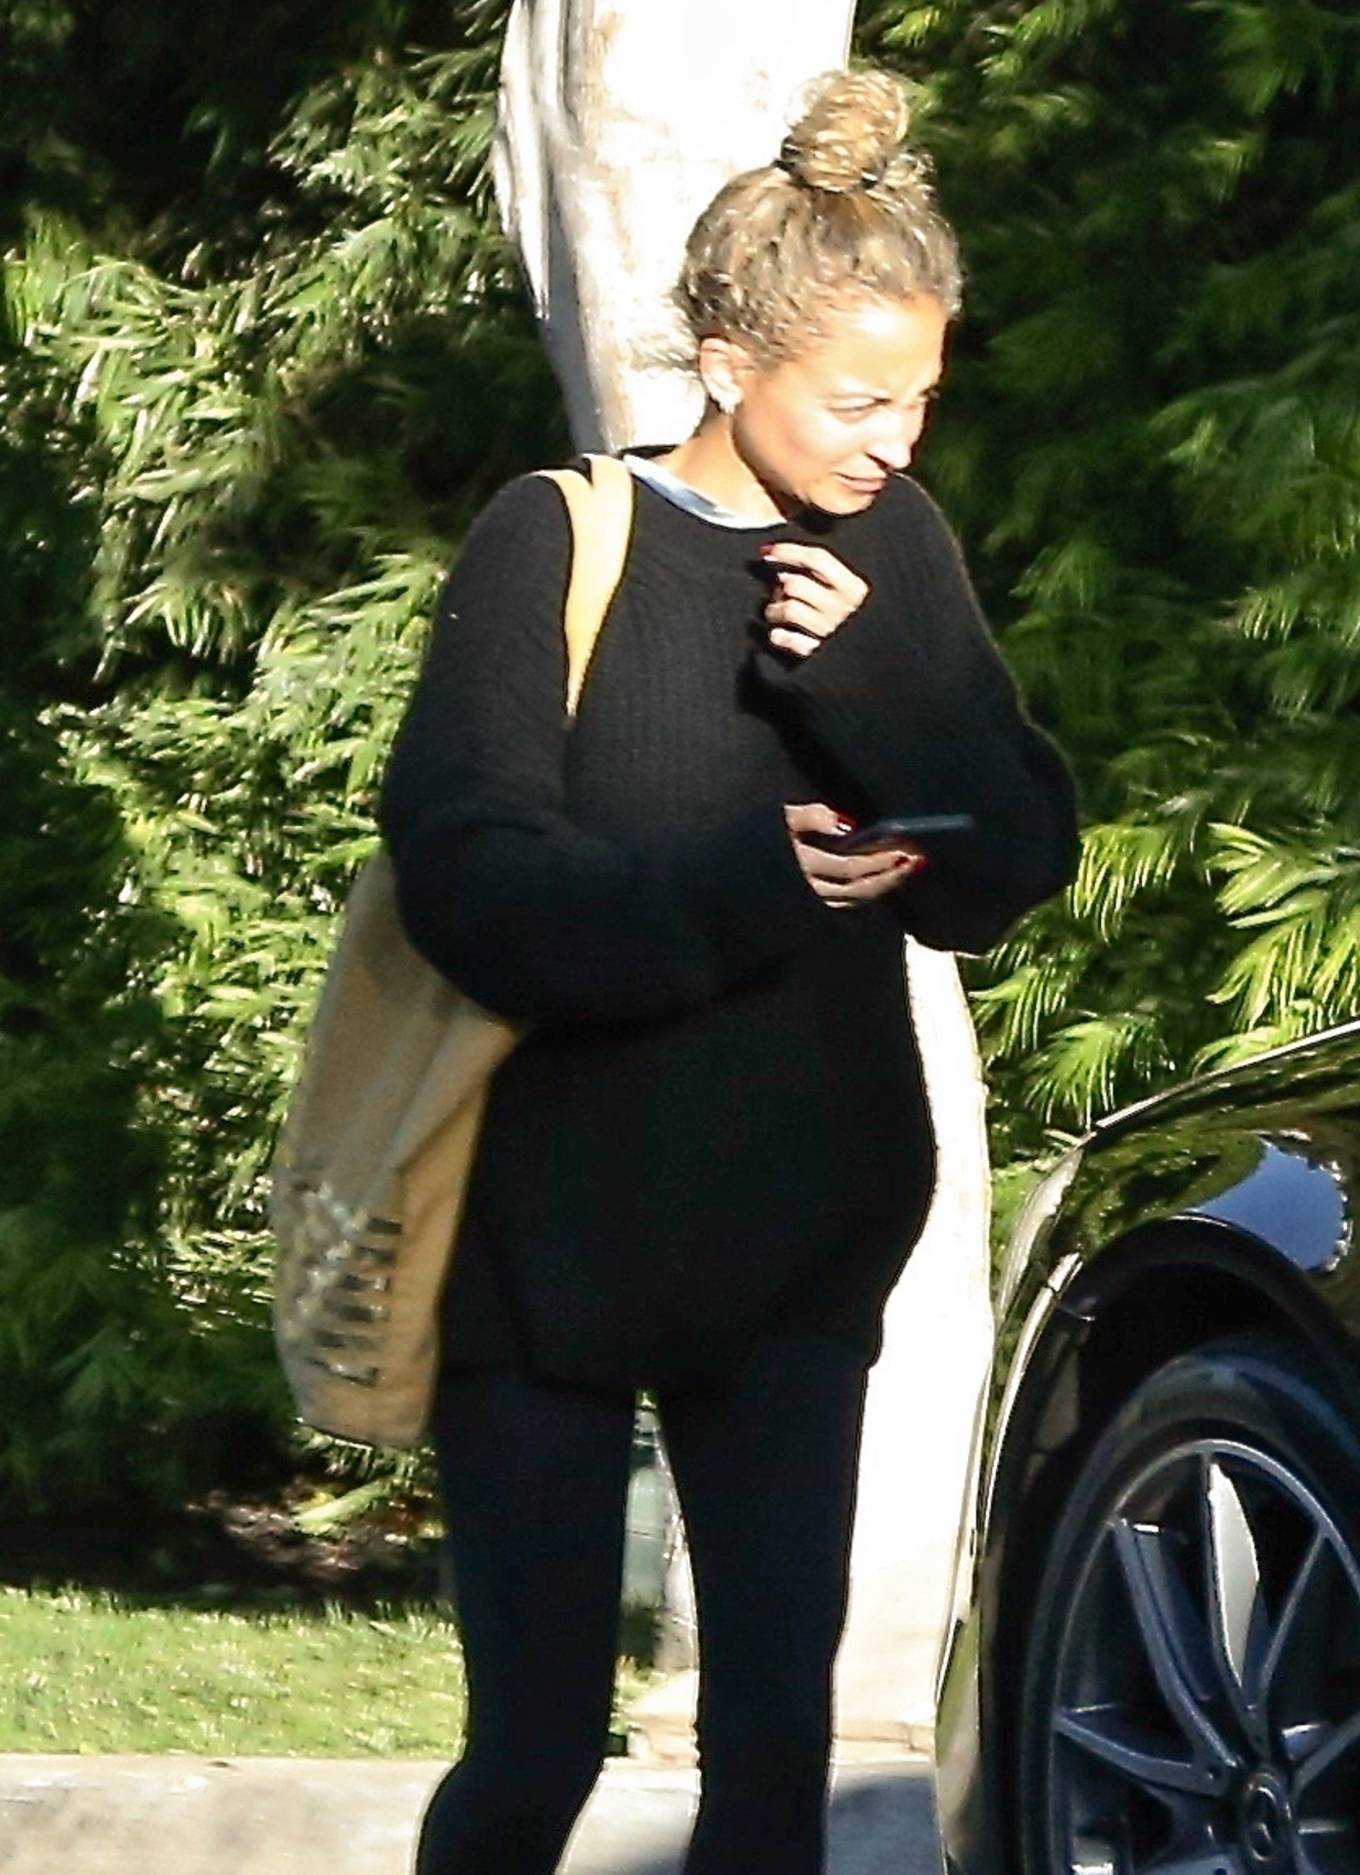 Nicole Richie visiting a friend in West Hollywood